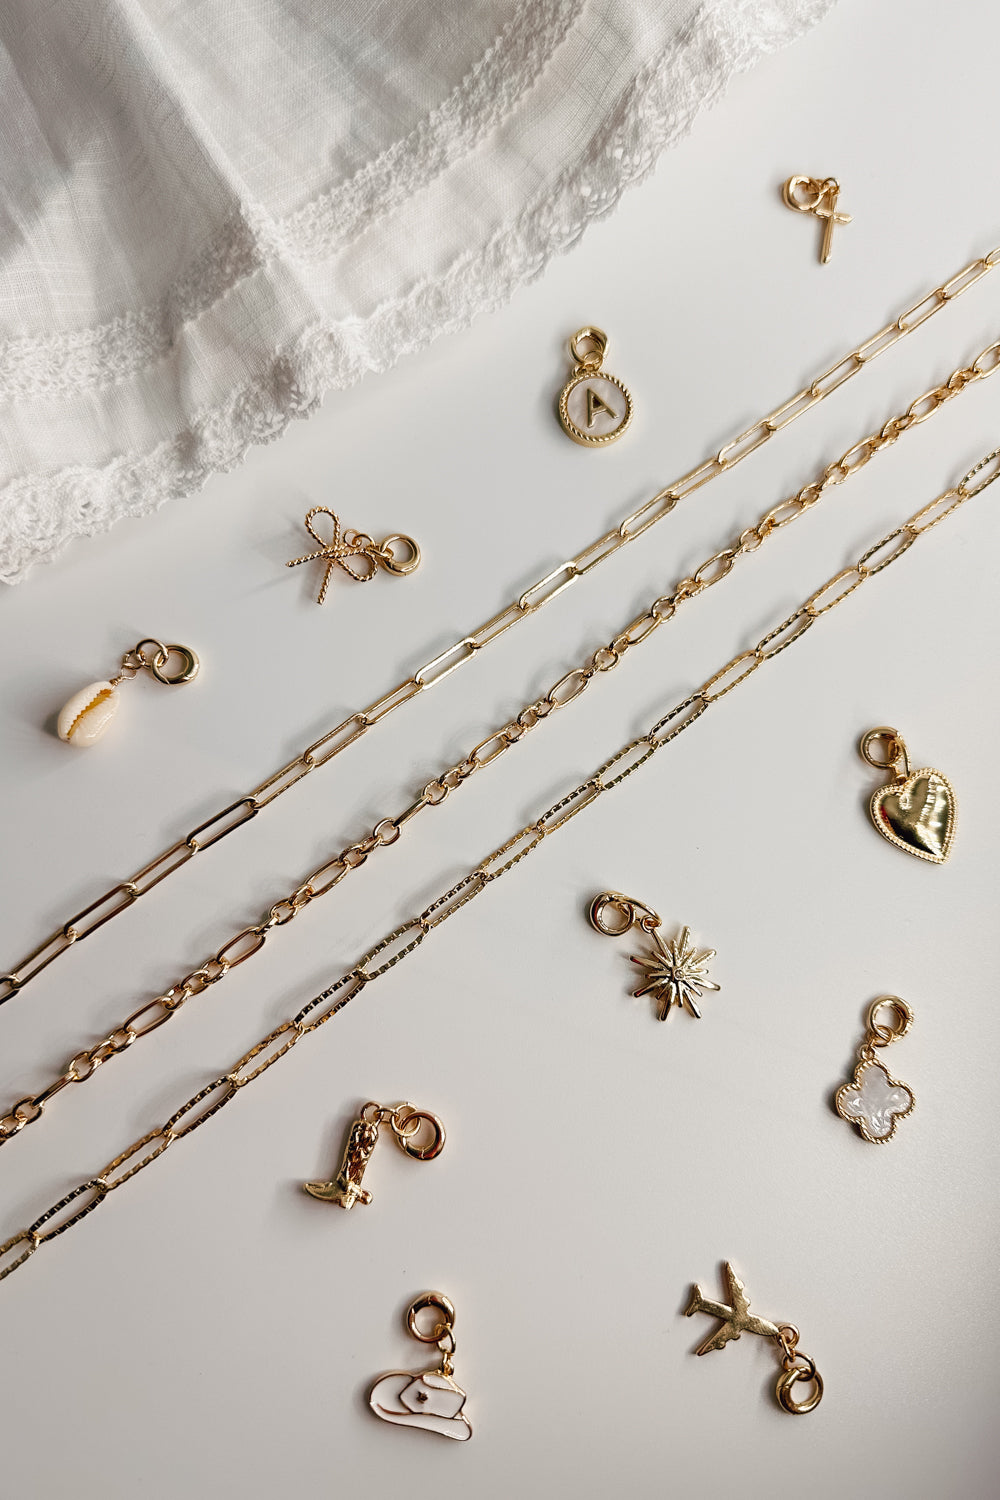 Image shows 3 chain necklaces laid out with assorted charms on each side. Shown against a white background